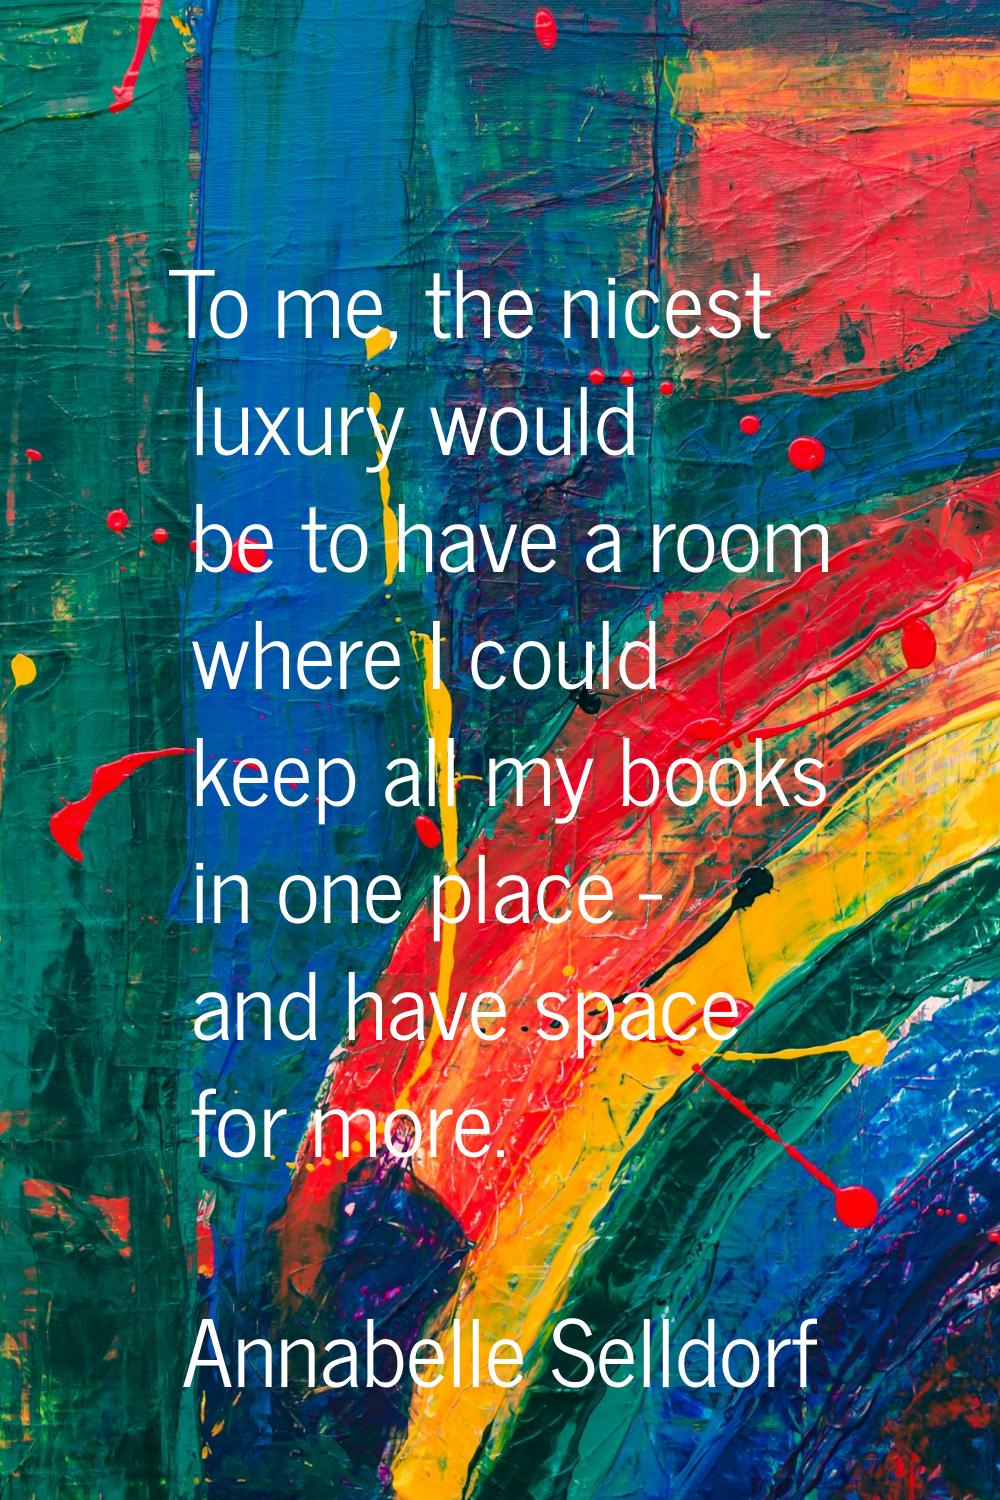 To me, the nicest luxury would be to have a room where I could keep all my books in one place - and